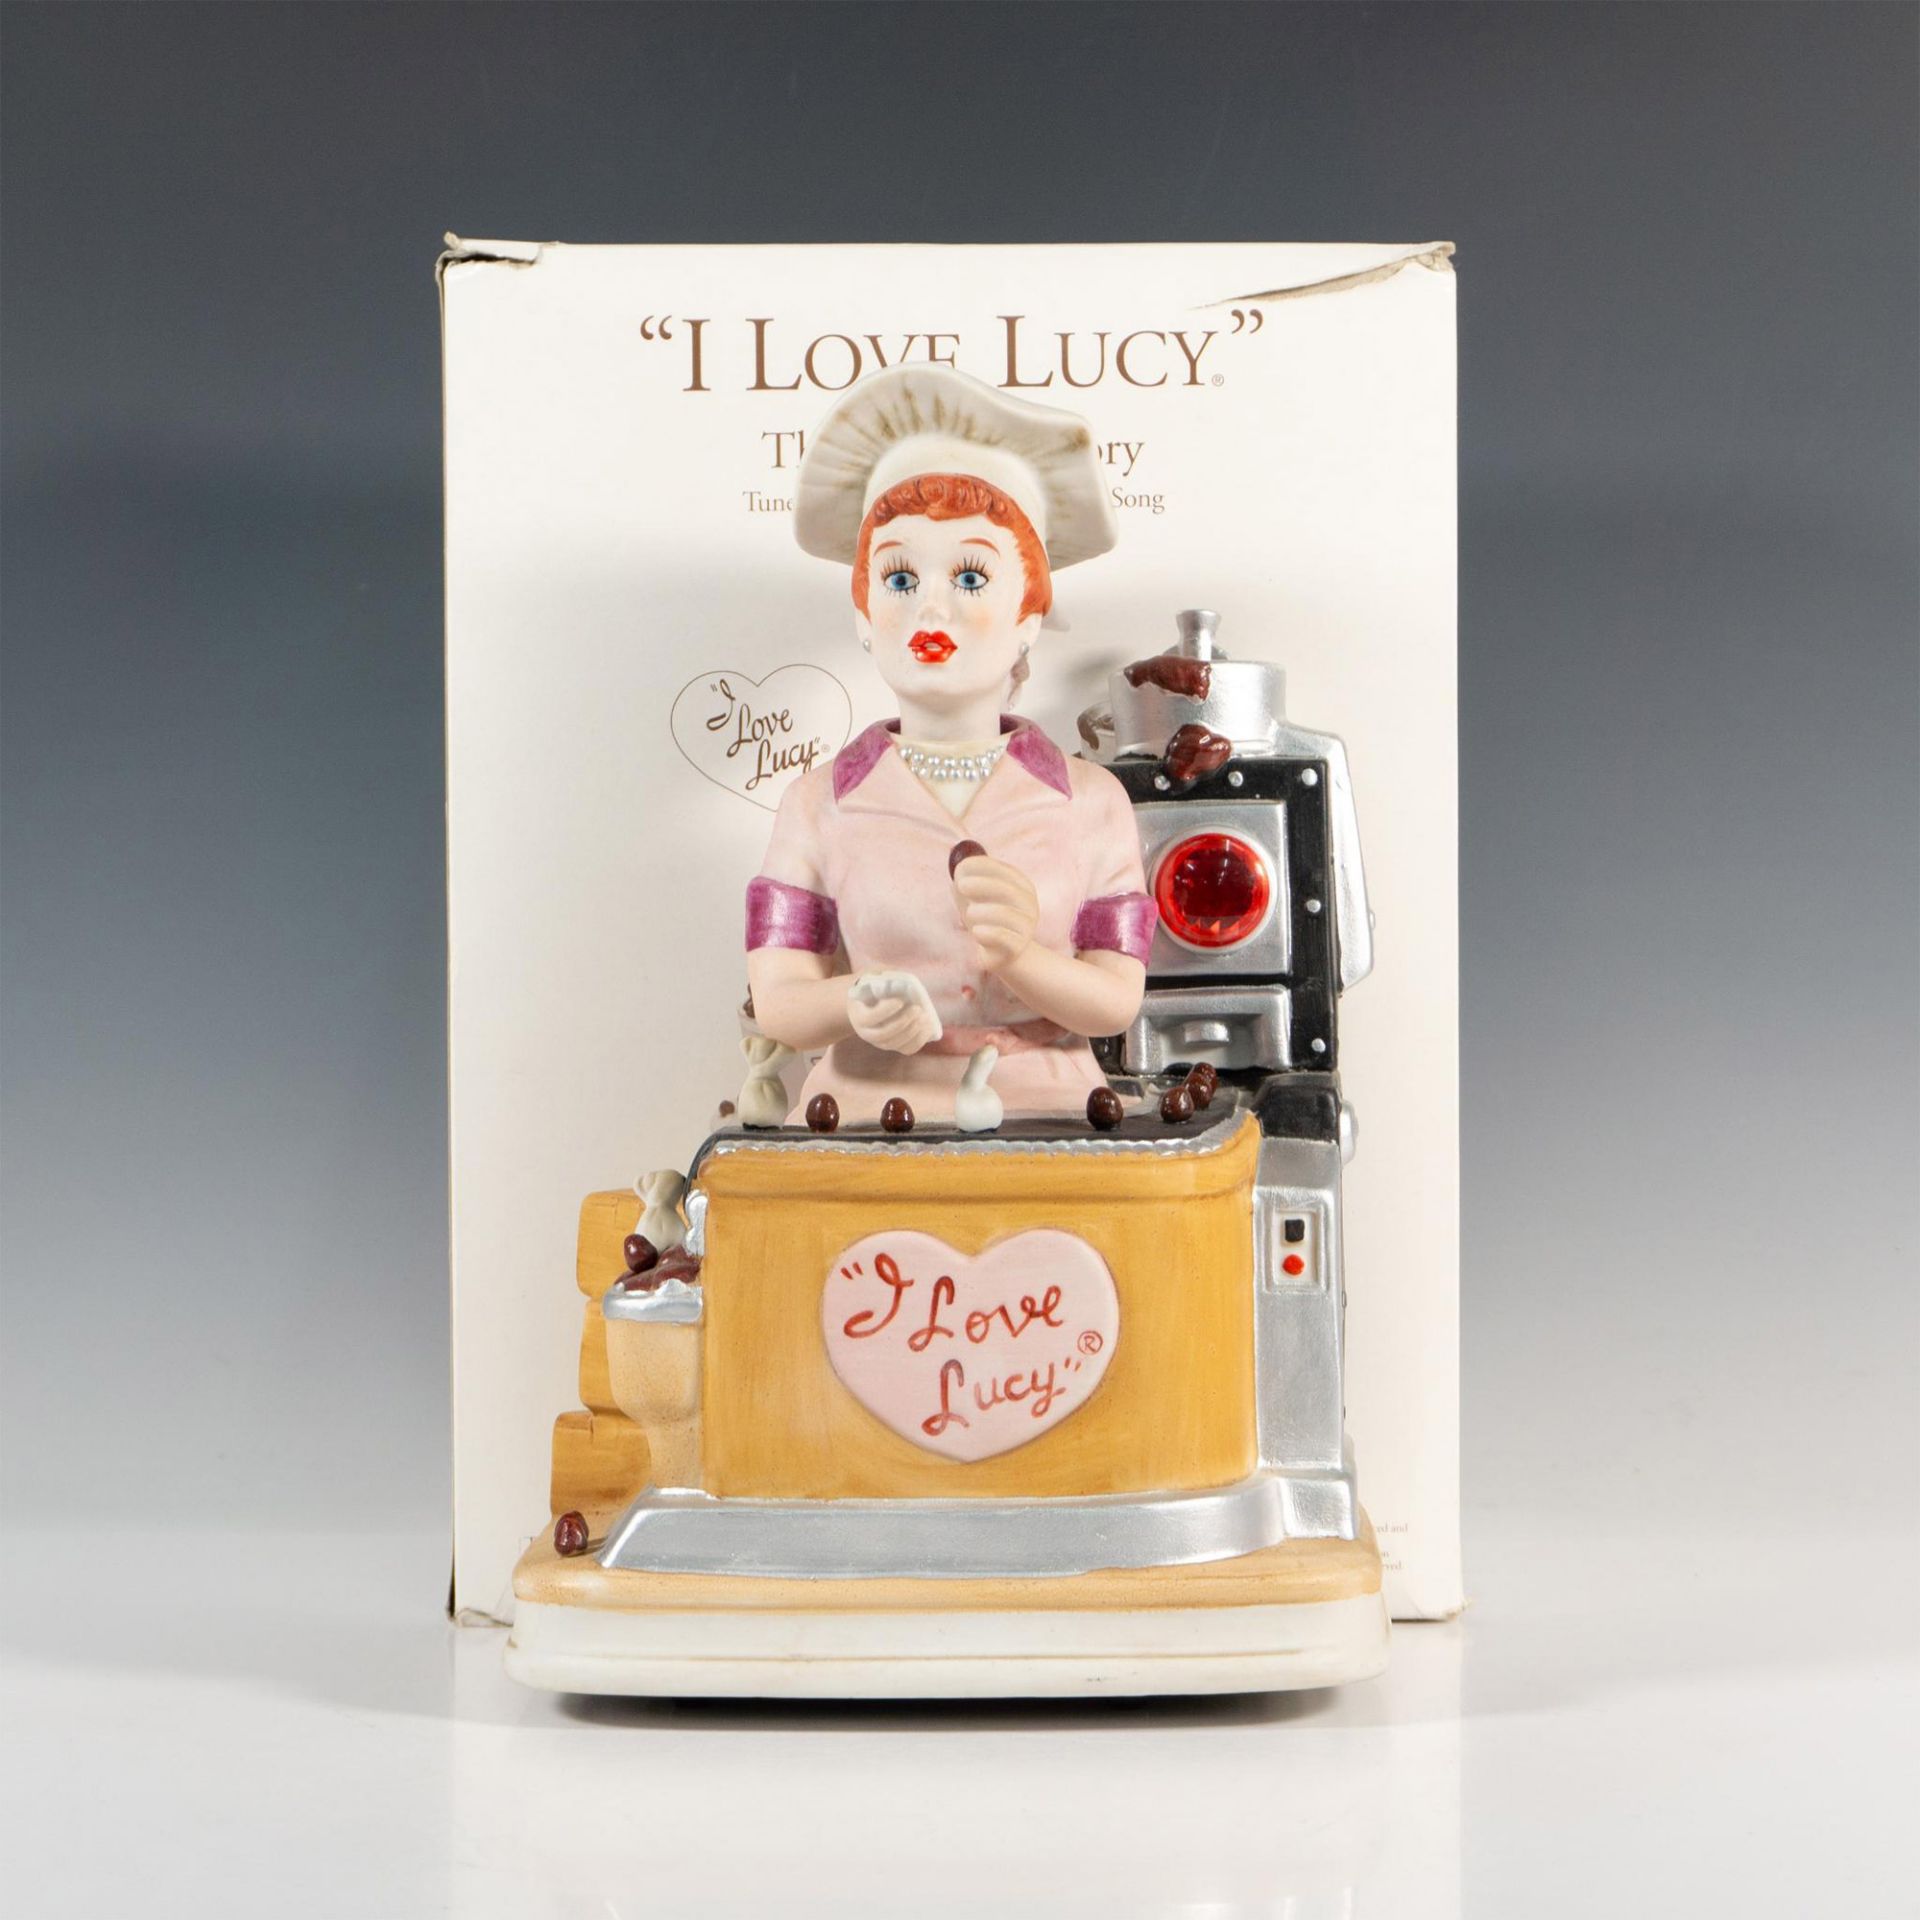 Waco Melody In Motion Musical I Love Lucy Figurine - Image 2 of 5